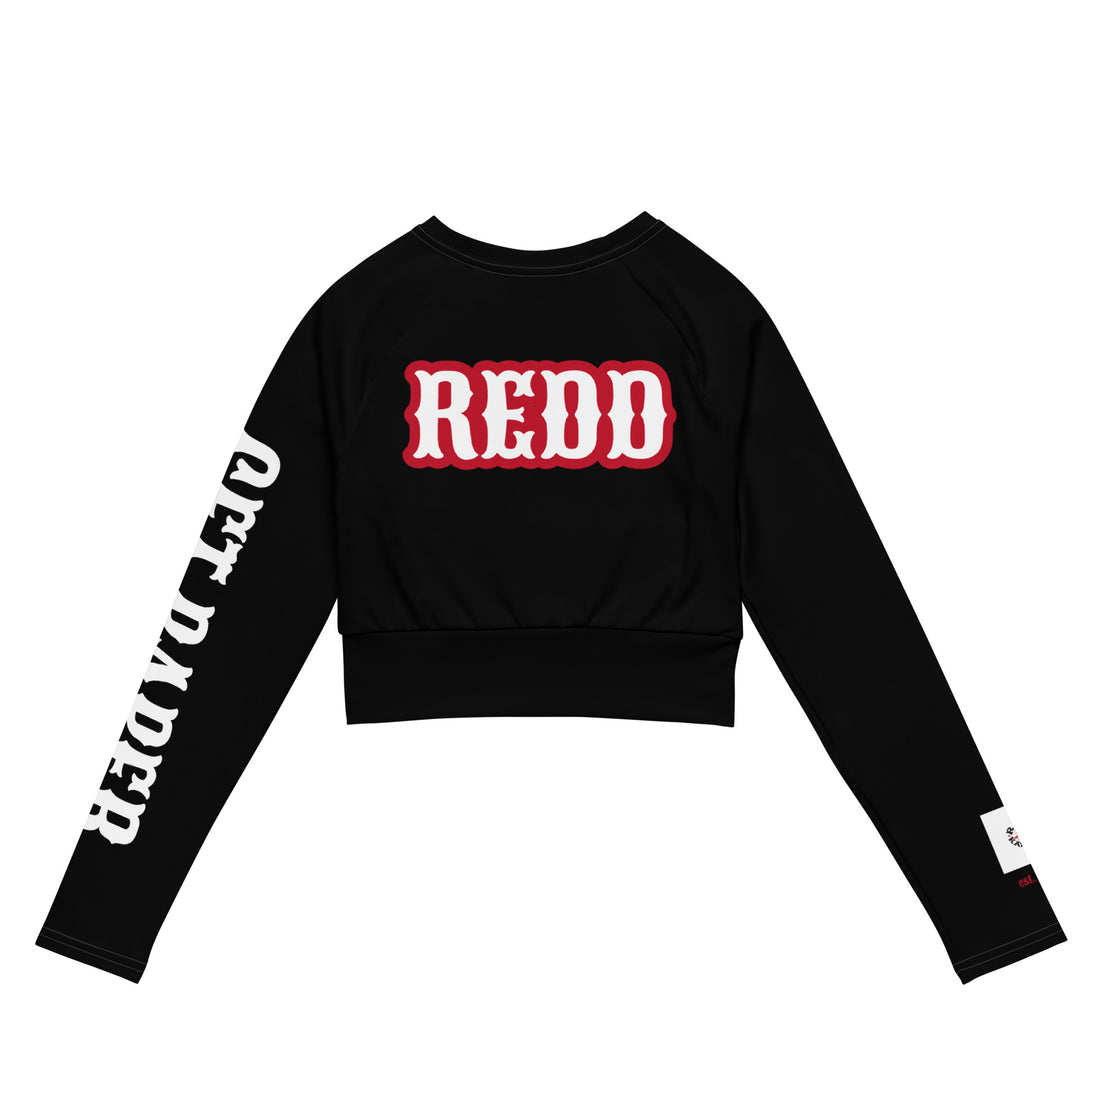 Long sleeve crop- Black Out